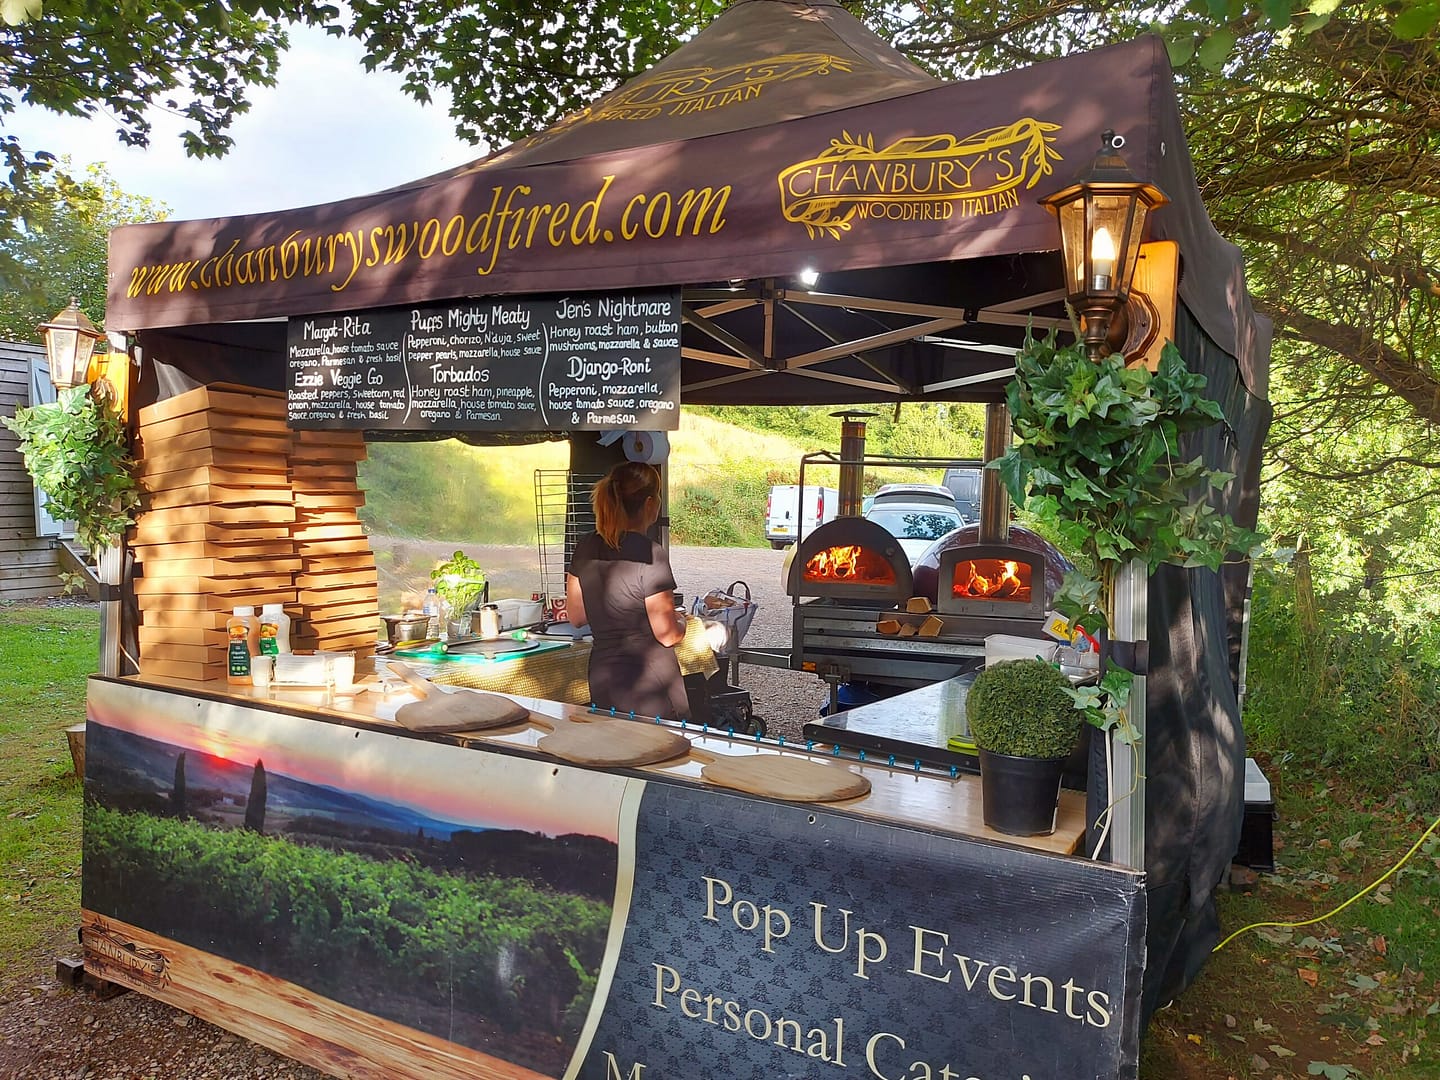 Chanbury's mobile catering for wediings and events. Set up with 2 woodfired ovens for a pizza buffet service.